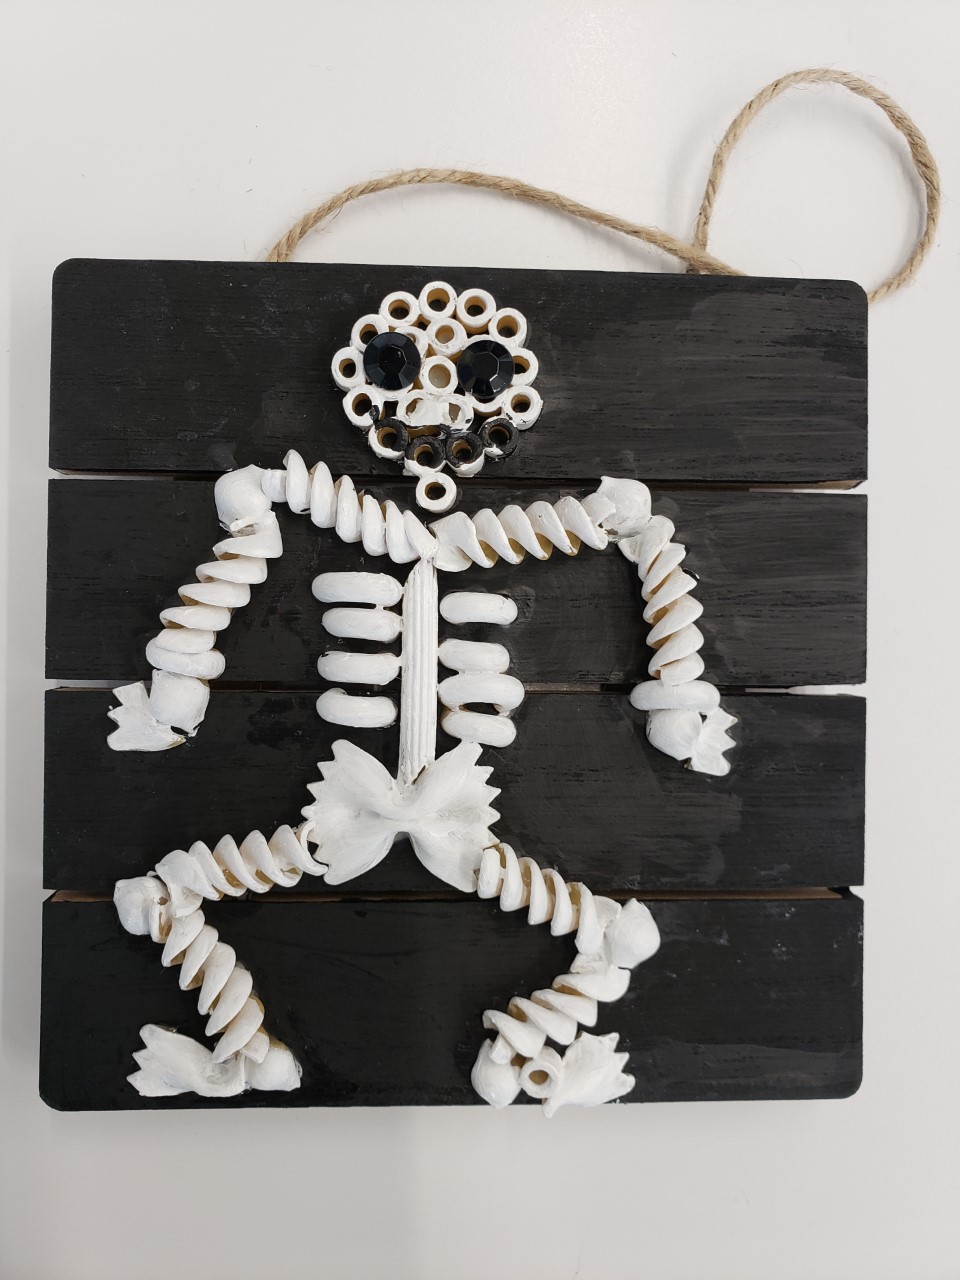 Skeleton art made out of pasta